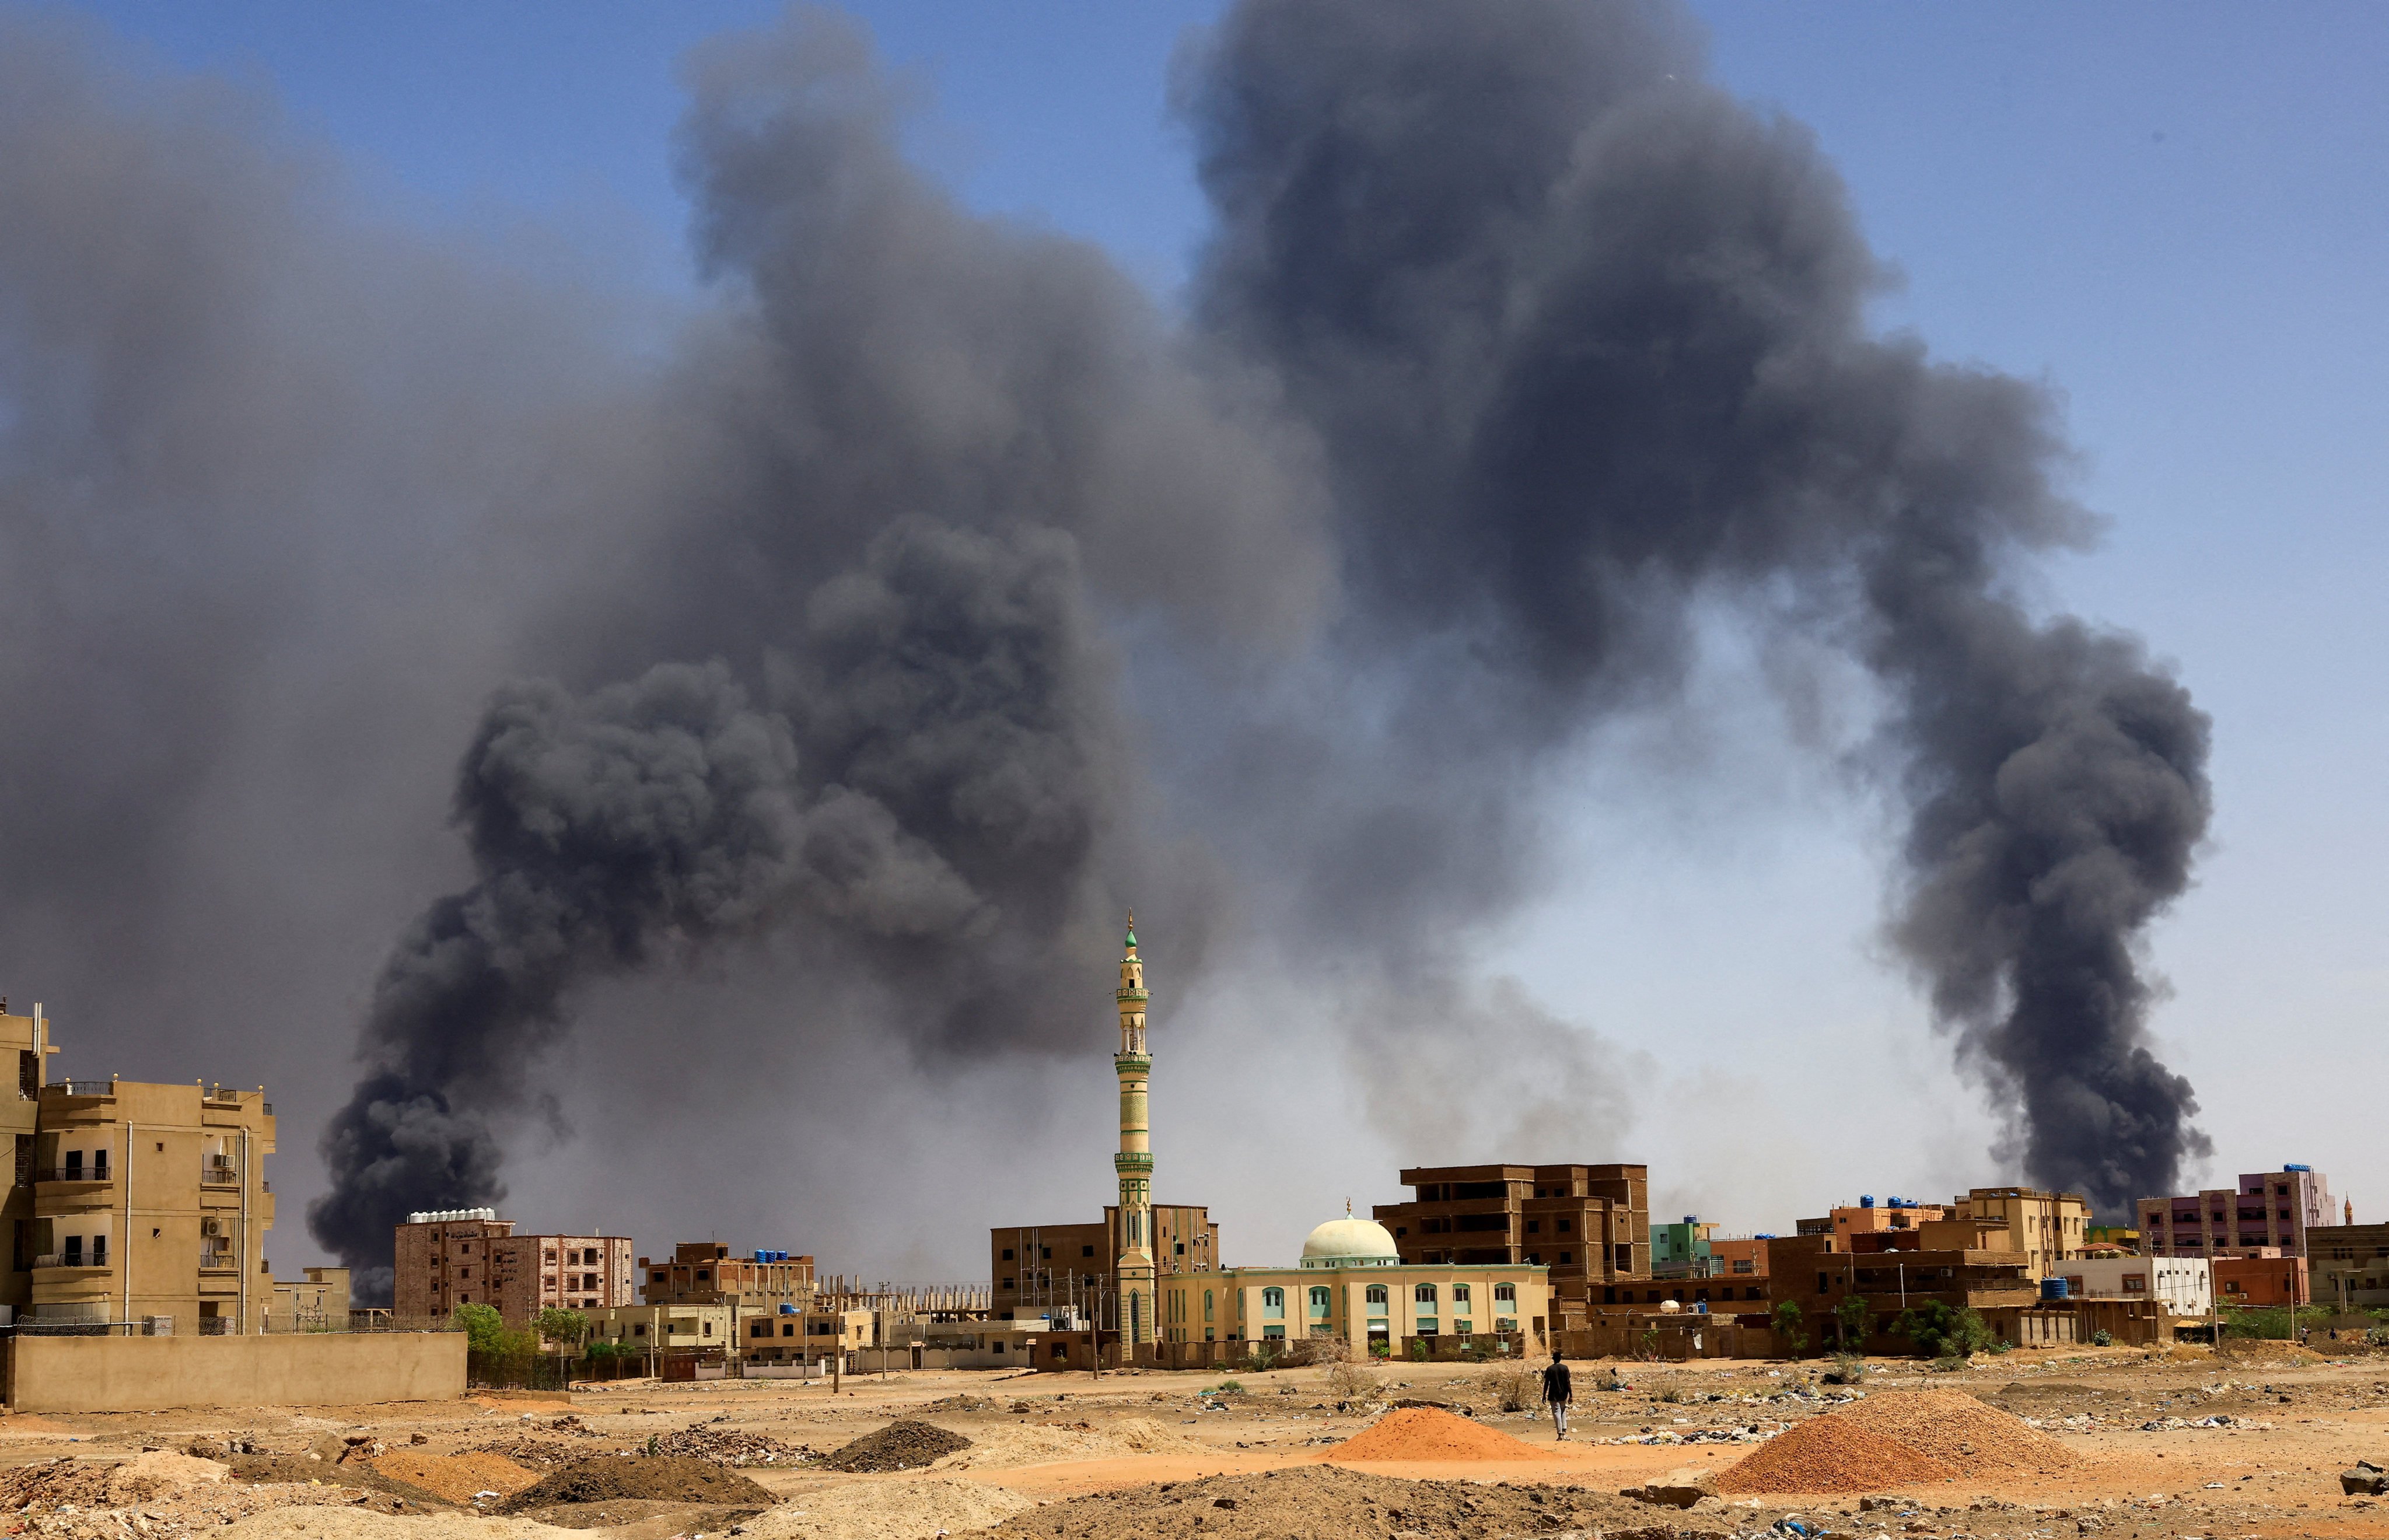 A man walks while smoke rises above buildings during clashes between the paramilitary Rapid Support Forces and the army in Khartoum North, Sudan. Photo: Reuters